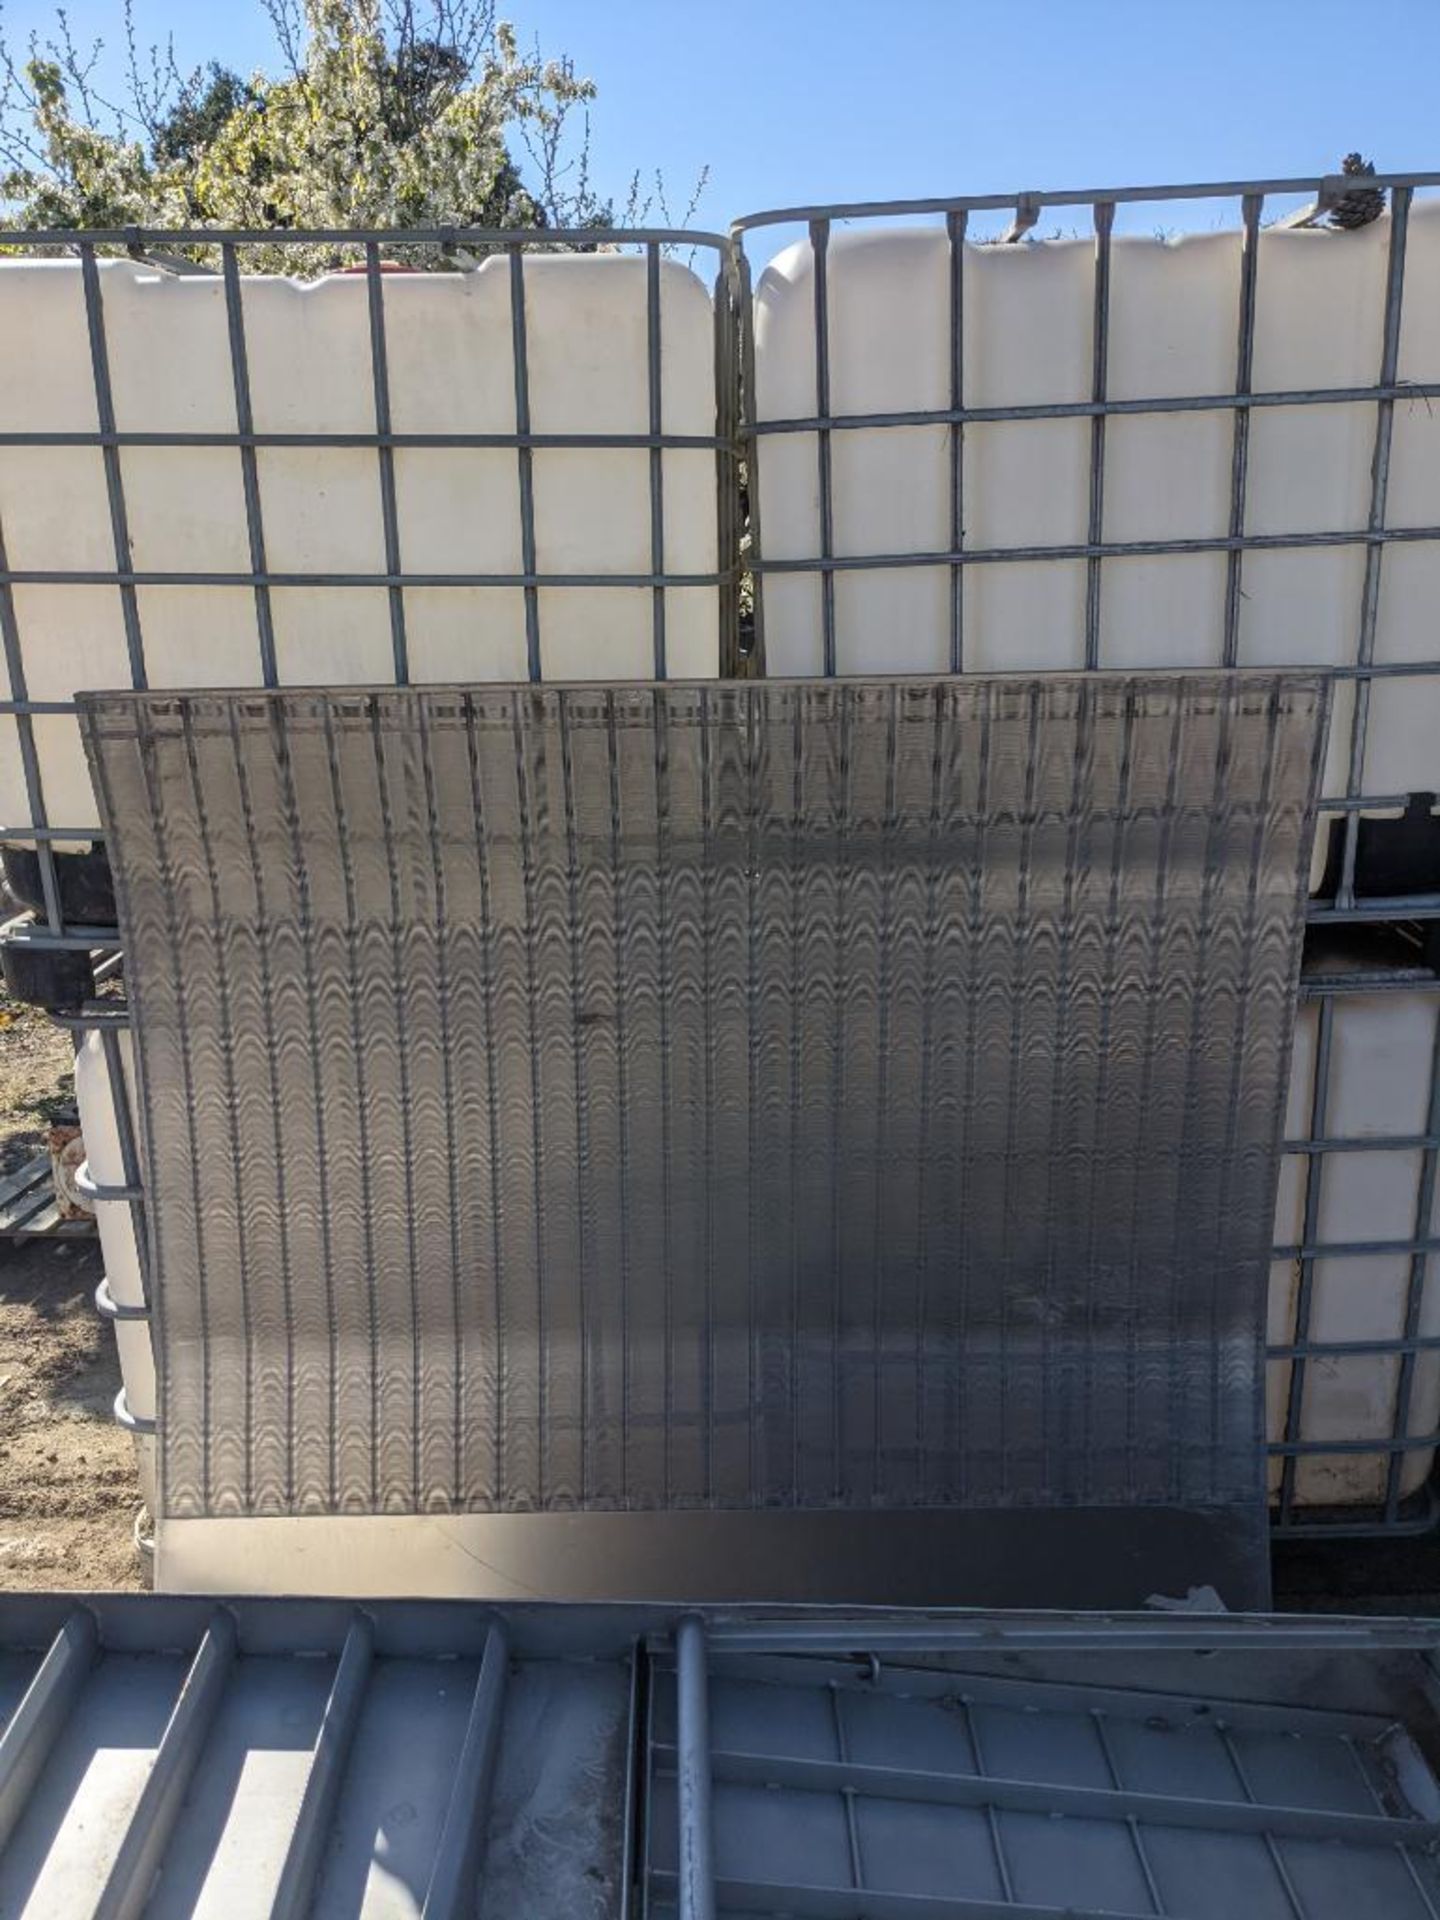 wedge wire parabolic screen stainless steel - Image 3 of 11